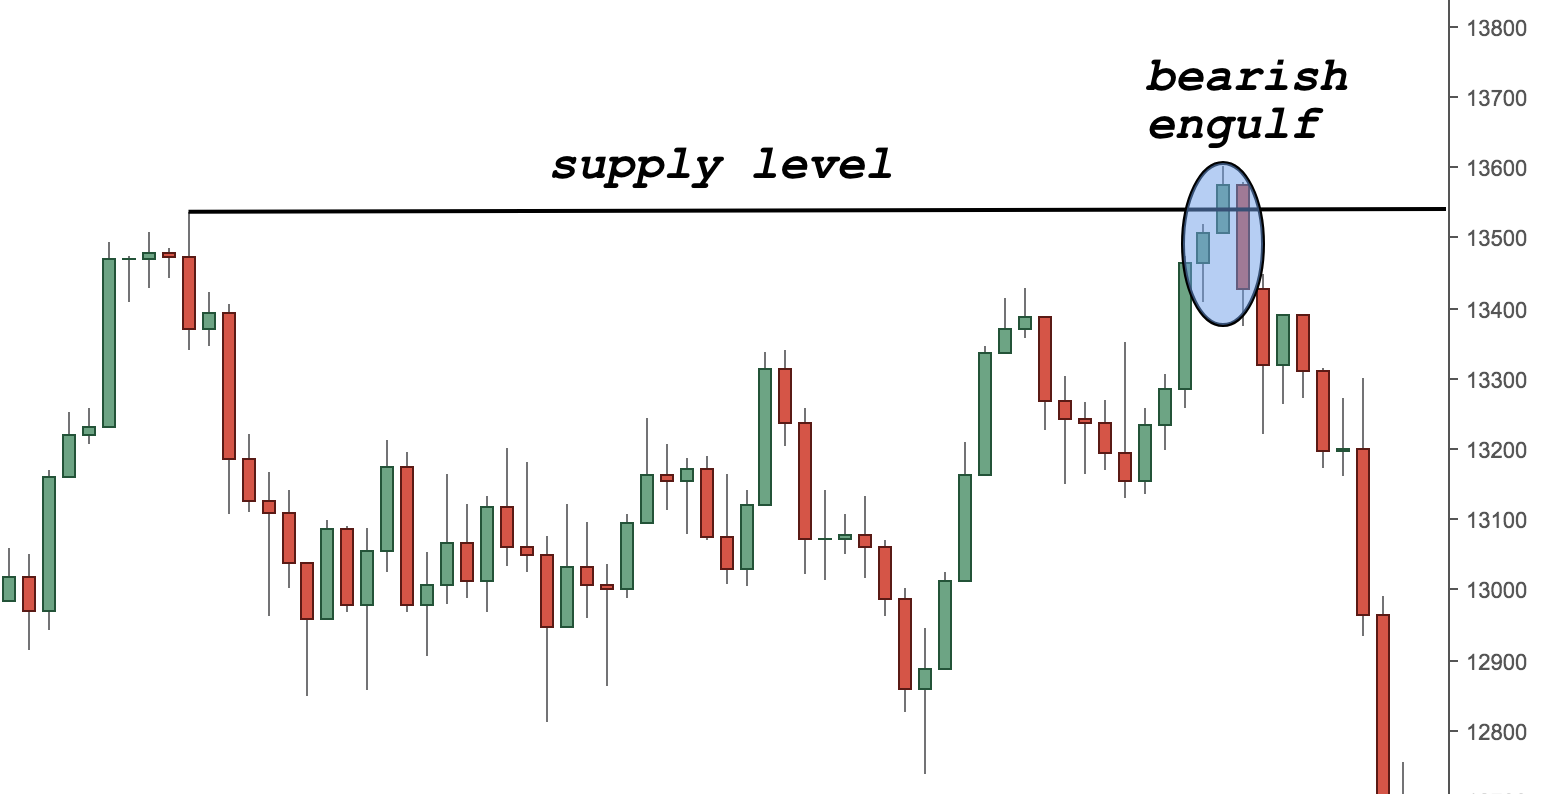 Supply and Demand Levels